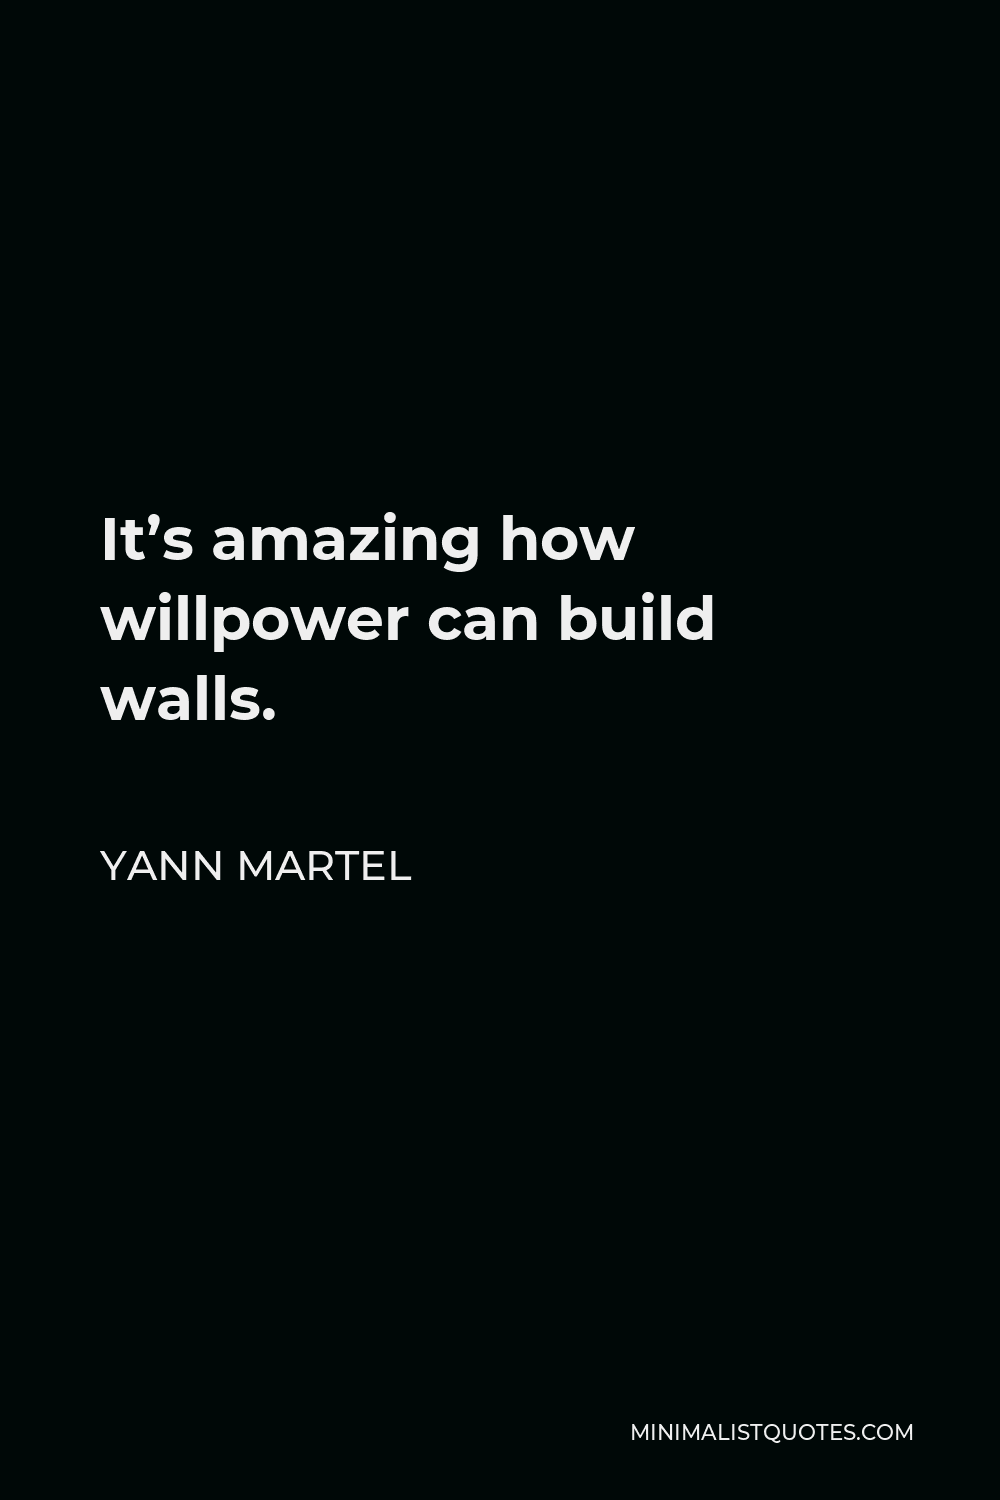 Yann Martel Quote - It’s amazing how willpower can build walls.